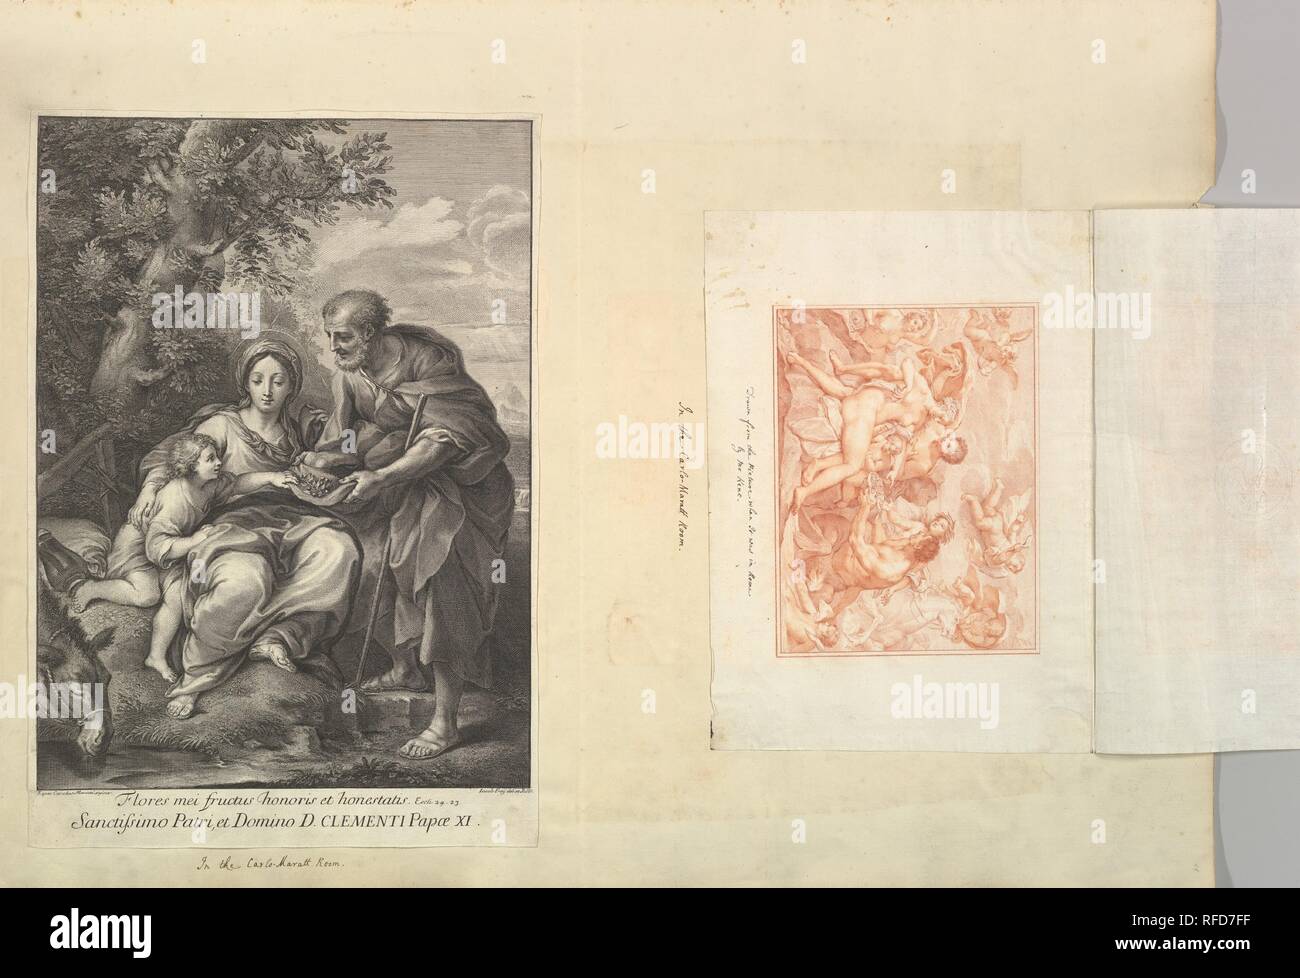 Leaf from Aedes Walpolianae mounted with a print and a drawing: (a): The Virgin and Joseph with the Young Jesus; (b): Acis and Galatea. Artist: Johann Jakob Frey the Elder (Swiss, active in Rome 1681-1752); After Carlo Maratti (Italian, Camerano 1625-1713 Rome); After Carlo Maratti (Italian, Camerano 1625-1713 Rome); William Kent (British, Bridlington, Yorkshire ca. 1685-1748 London). Dimensions: Leaf: 28 15/16 × 20 1/2 in. (73.5 × 52 cm). Date: 1710-40. Museum: Metropolitan Museum of Art, New York, USA. Stock Photo